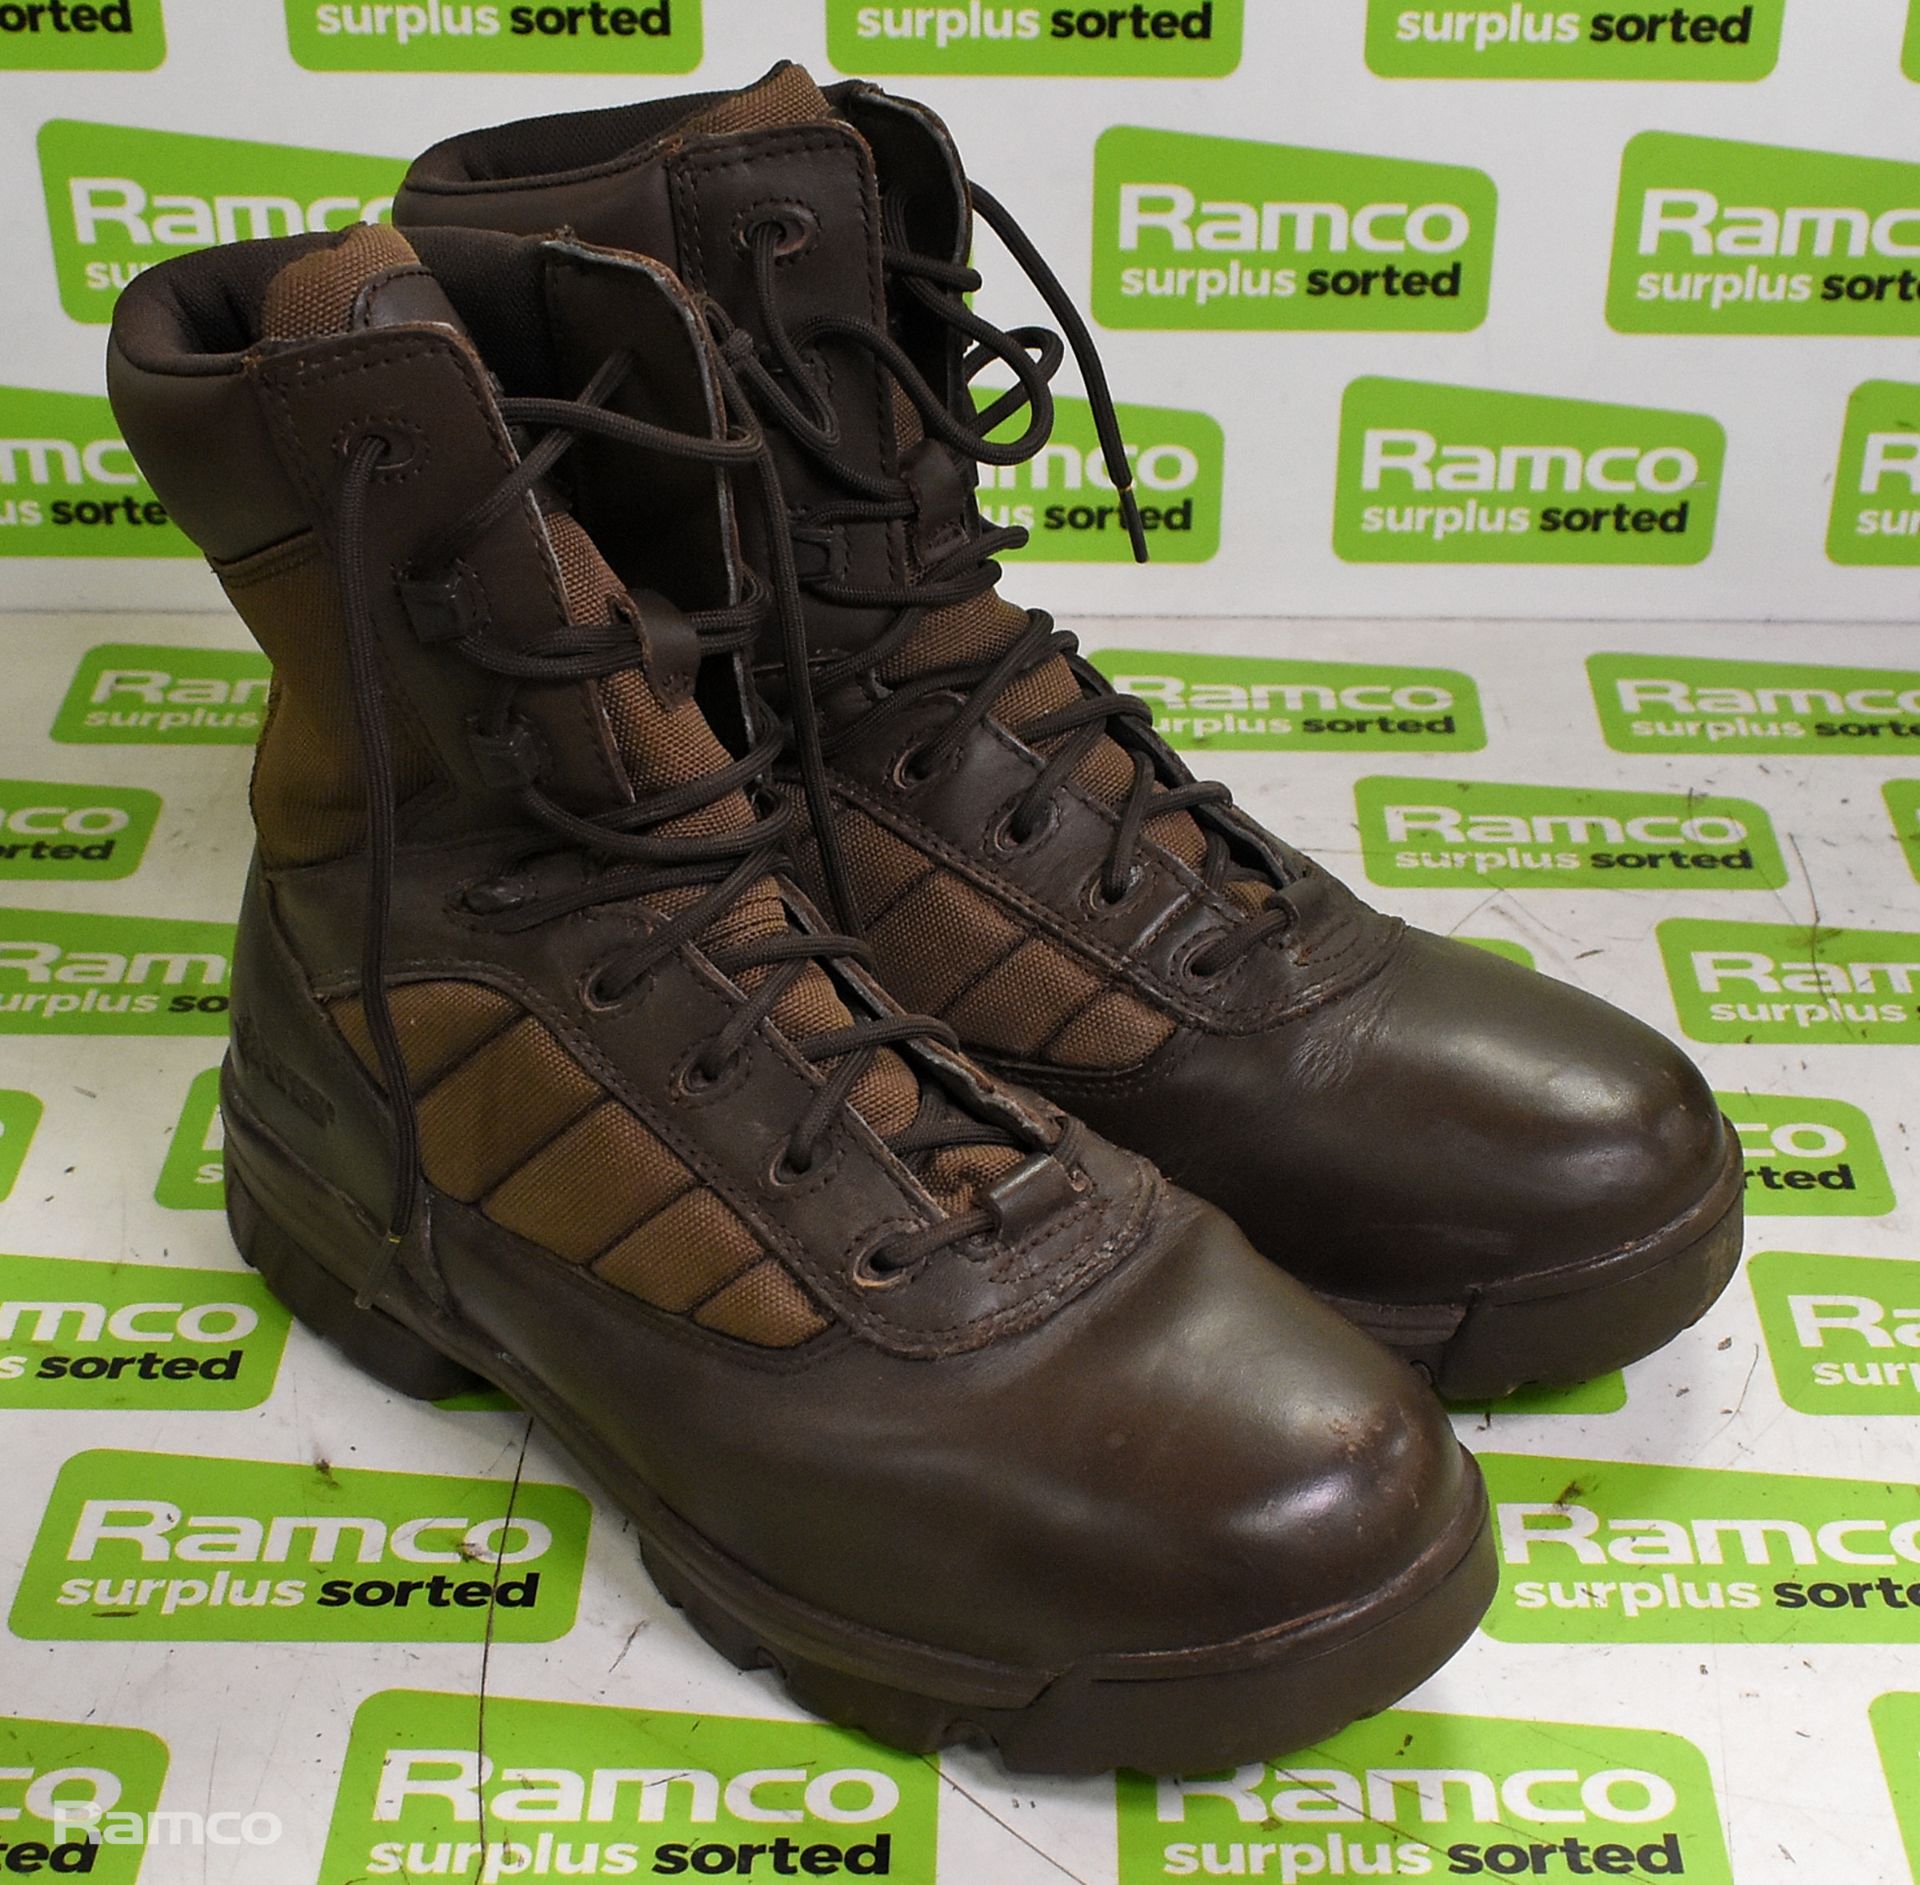 50x pairs of Various boots - Magnum, Haix & YDS - mixed grades and sizes - Image 5 of 18